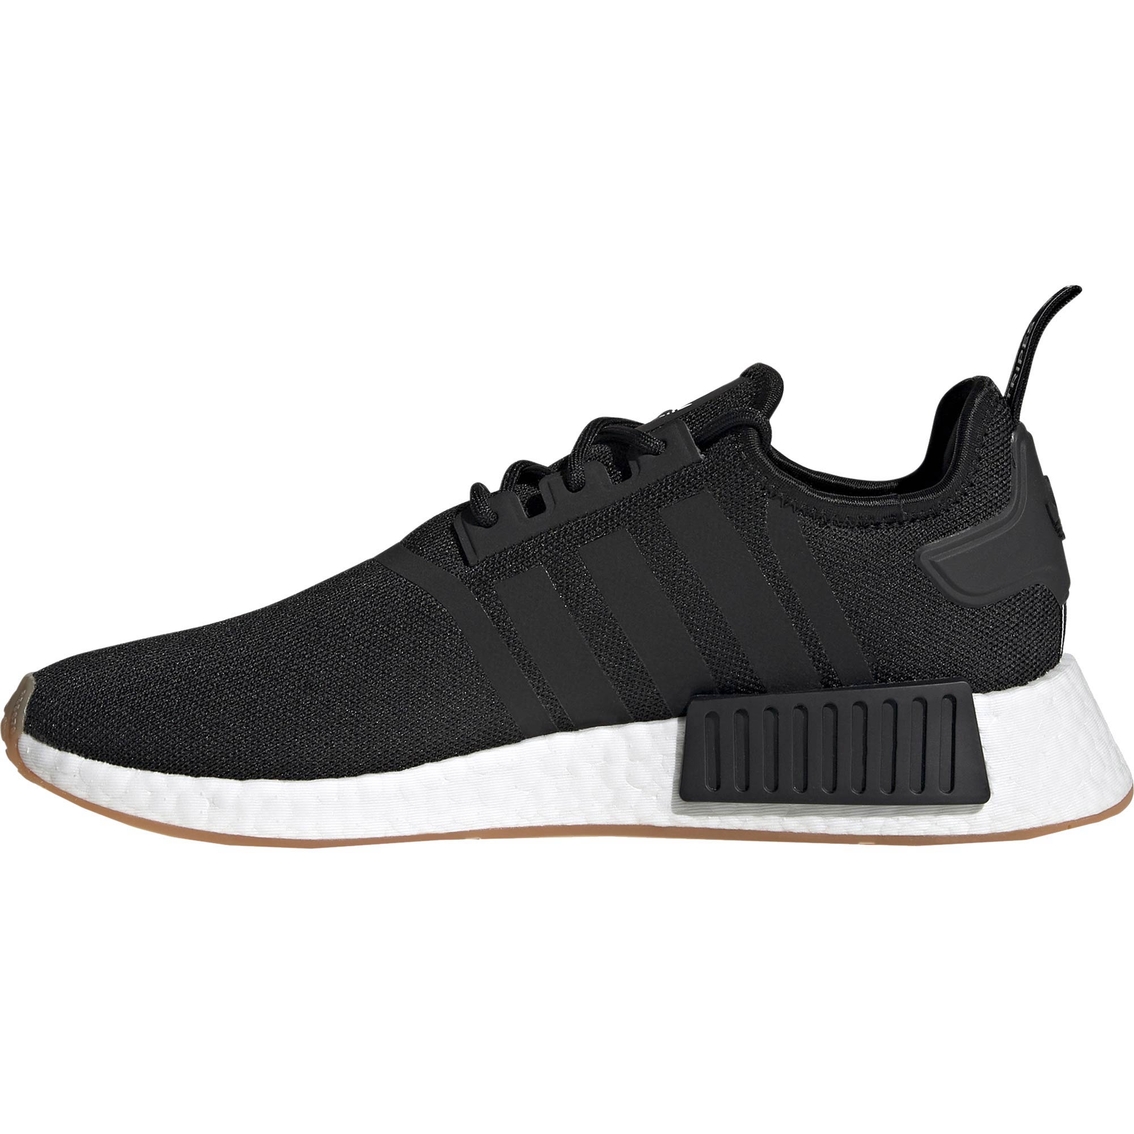 adidas Men's NMD R1 Sneakers - Image 3 of 8